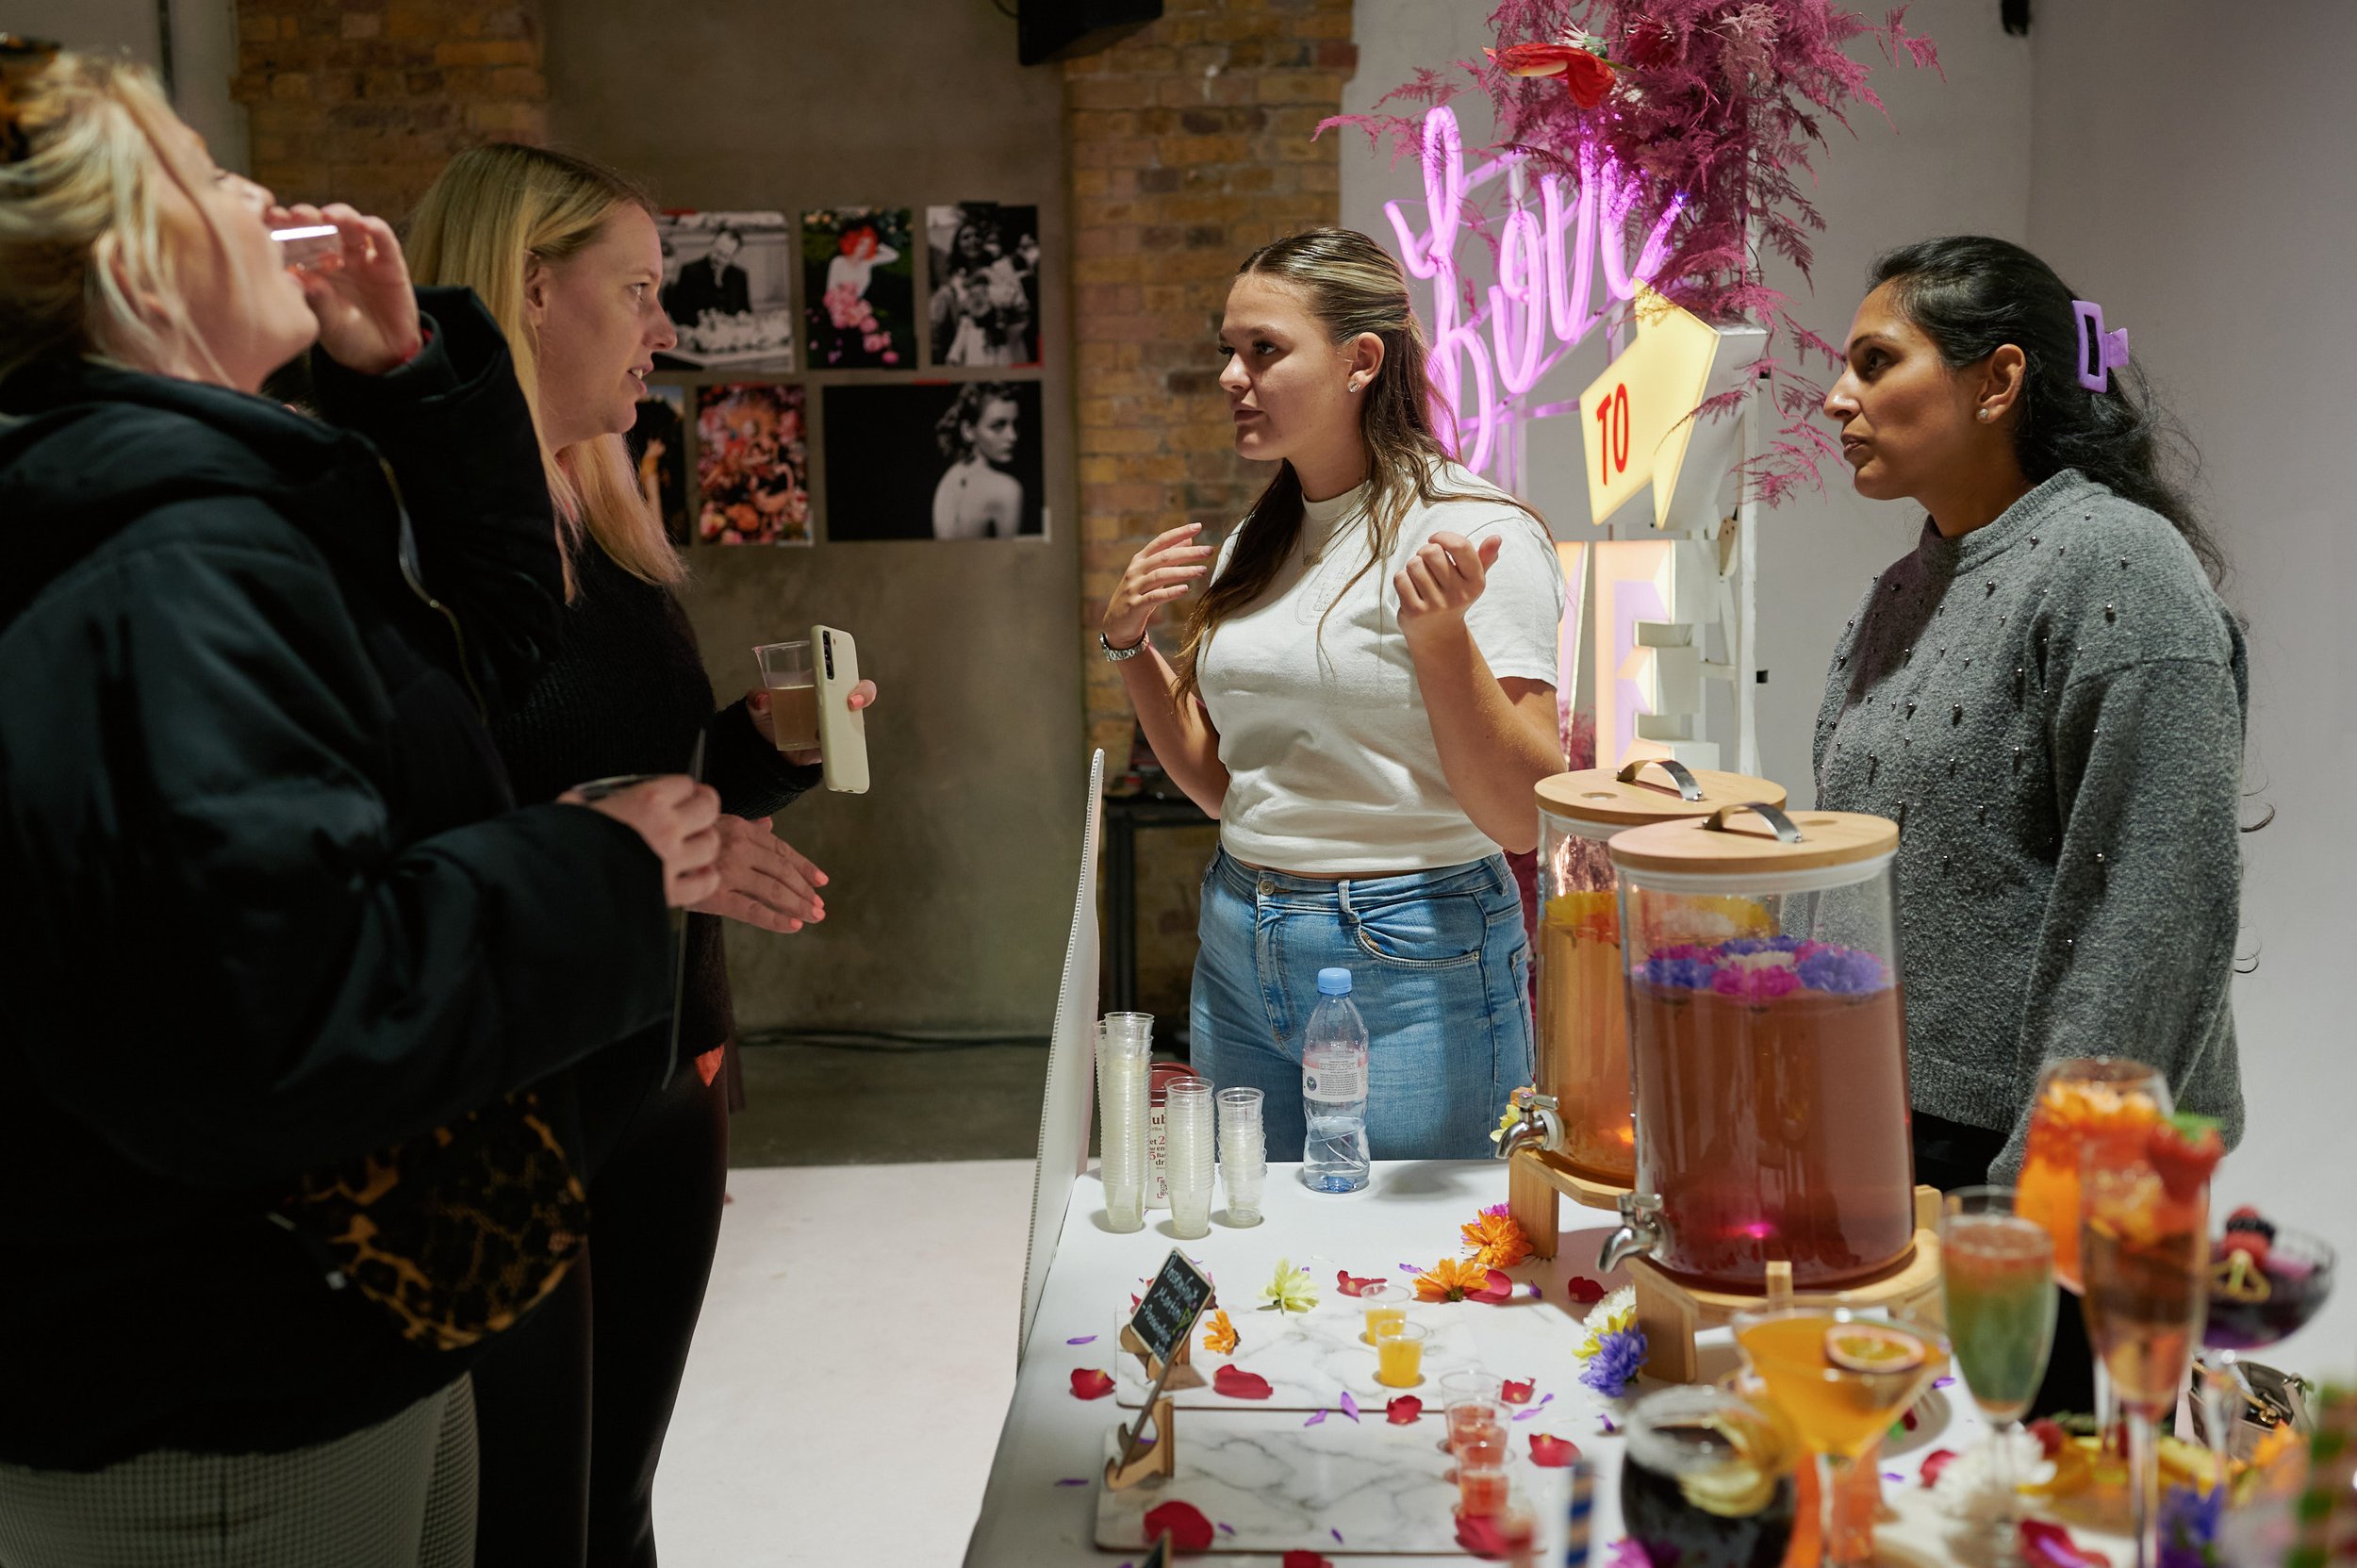  A tall woman with blonde hair is talking to suppliers at The Un-Wedding show. there is a table with some sort of floral drinks display and a neon sign in the background. 